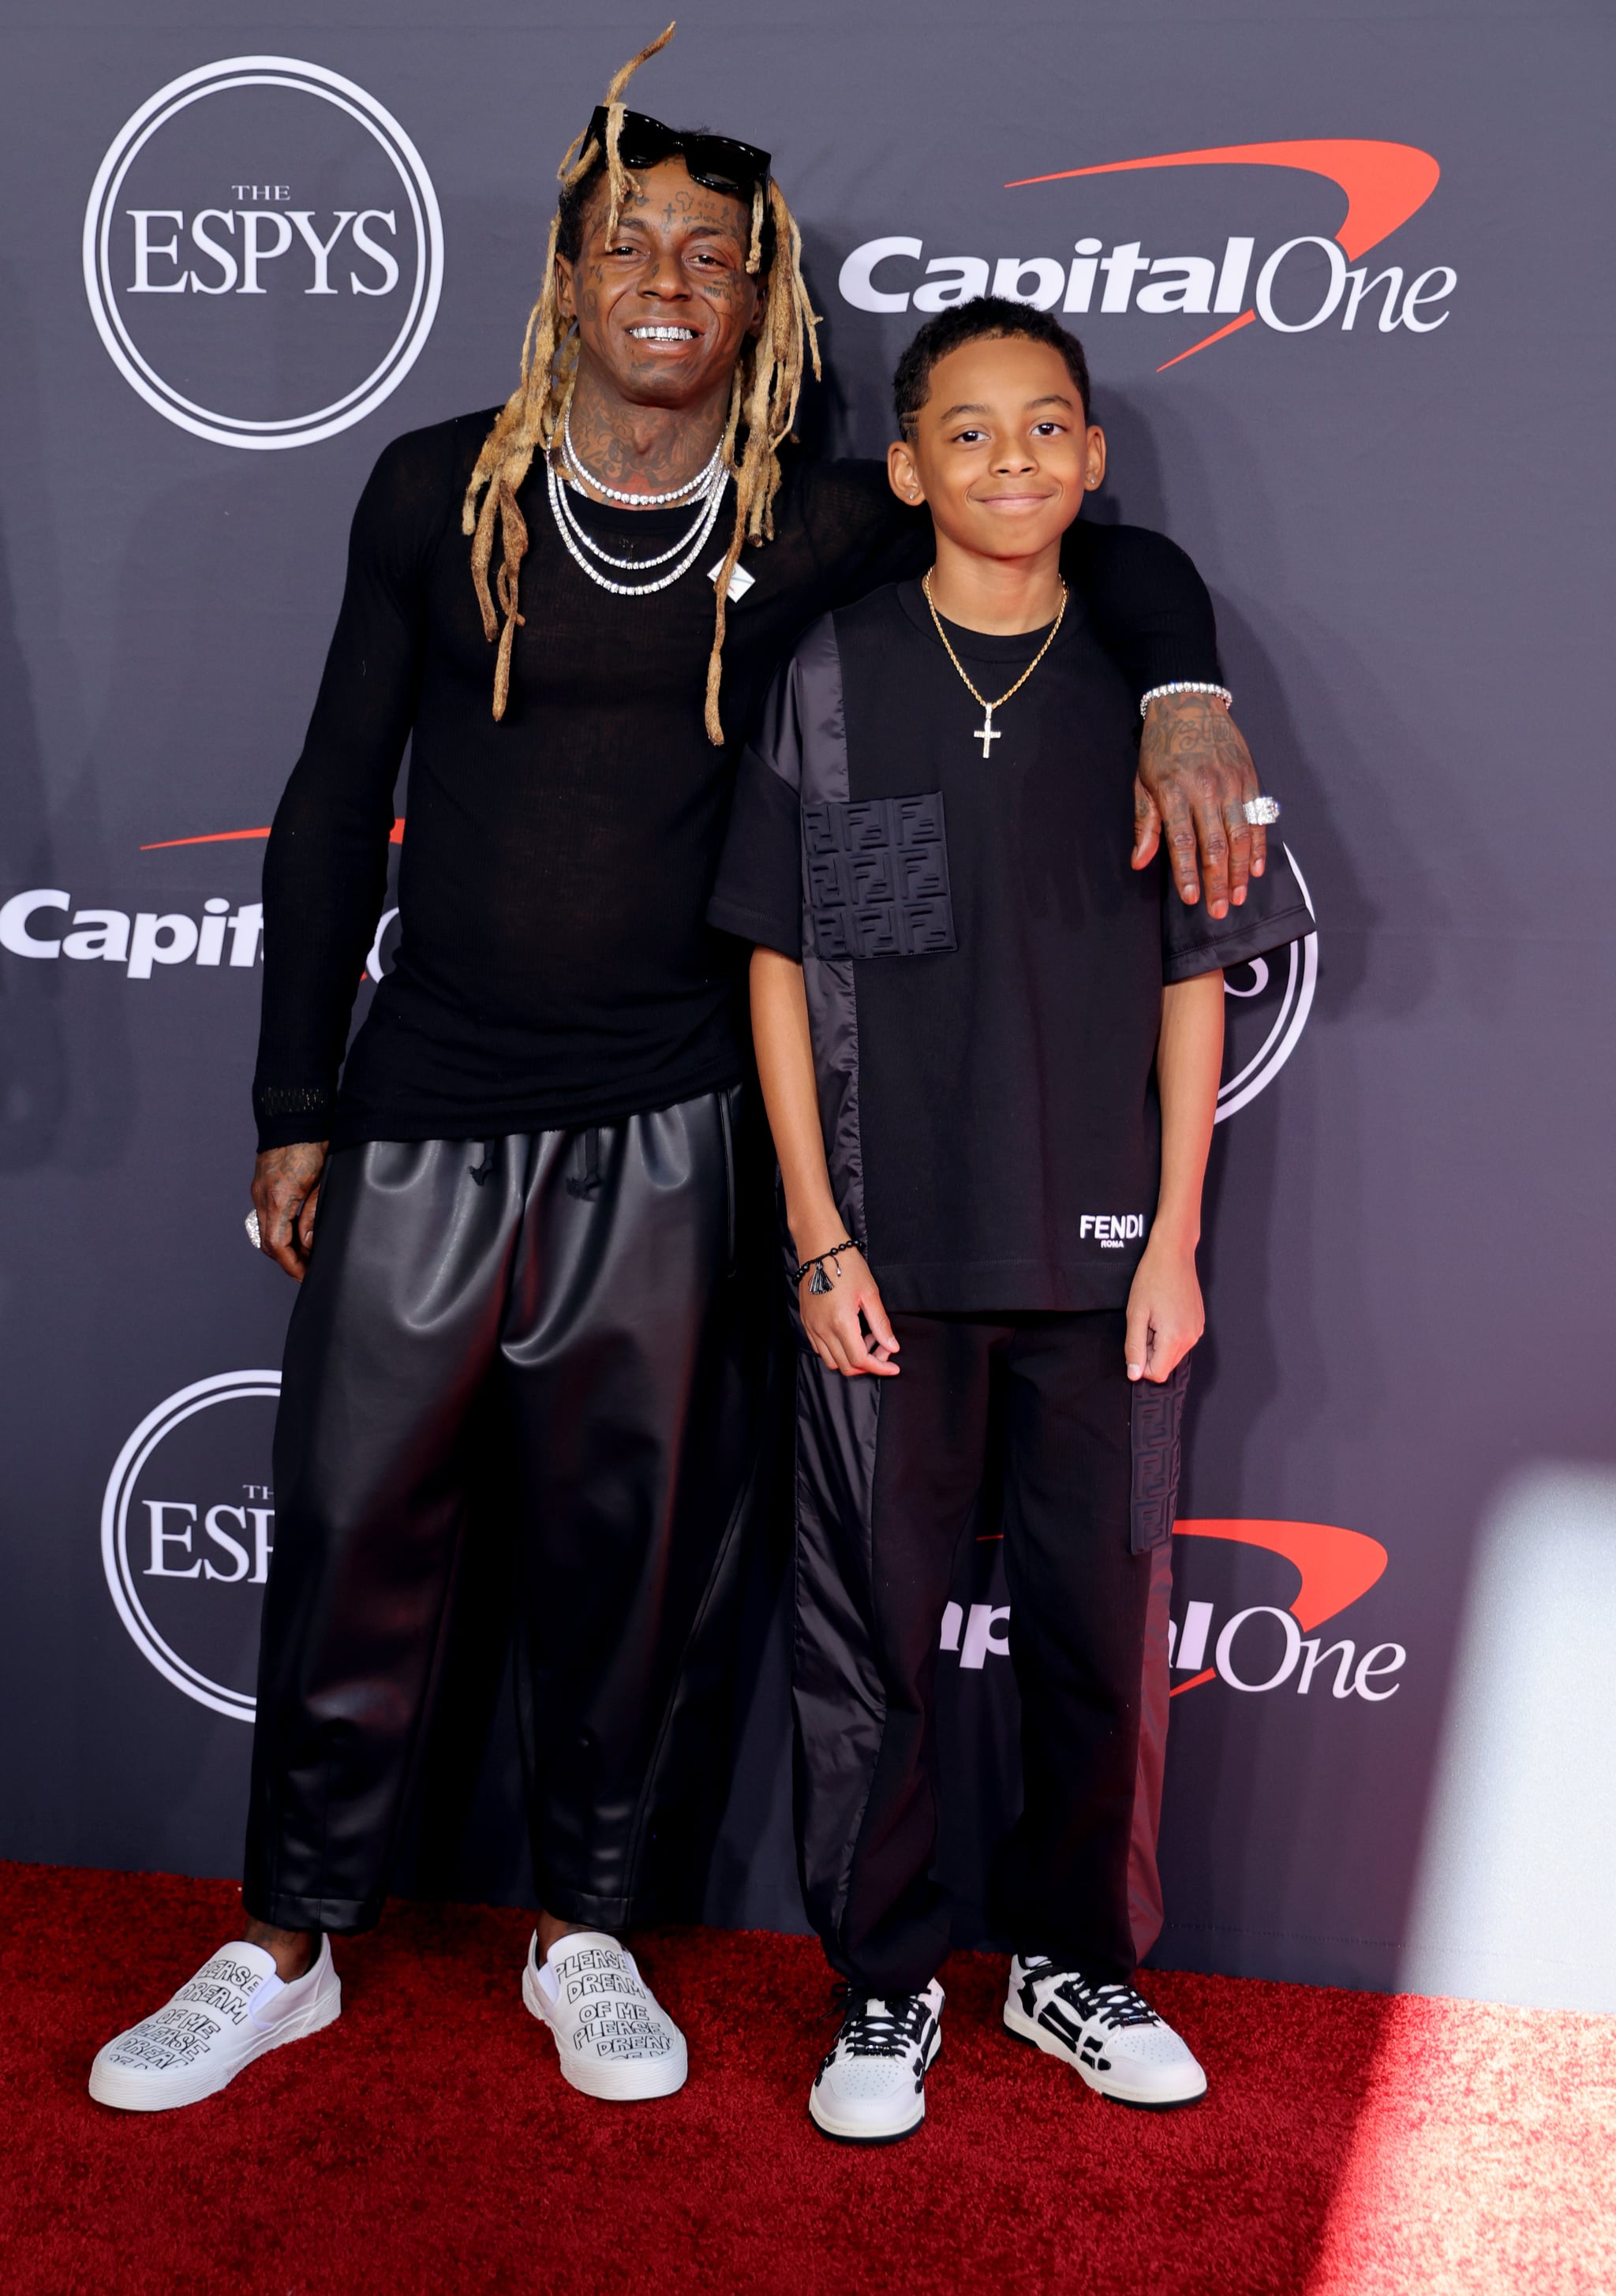 HOLLYWOOD, CALIFORNIA - JULY 20: (L-R) Lil Wayne and Kameron Carter attend the 2022 ESPYs at Dolby Theatre on July 20, 2022 in Hollywood, California. (Photo by Momodu Mansaray/WireImage)